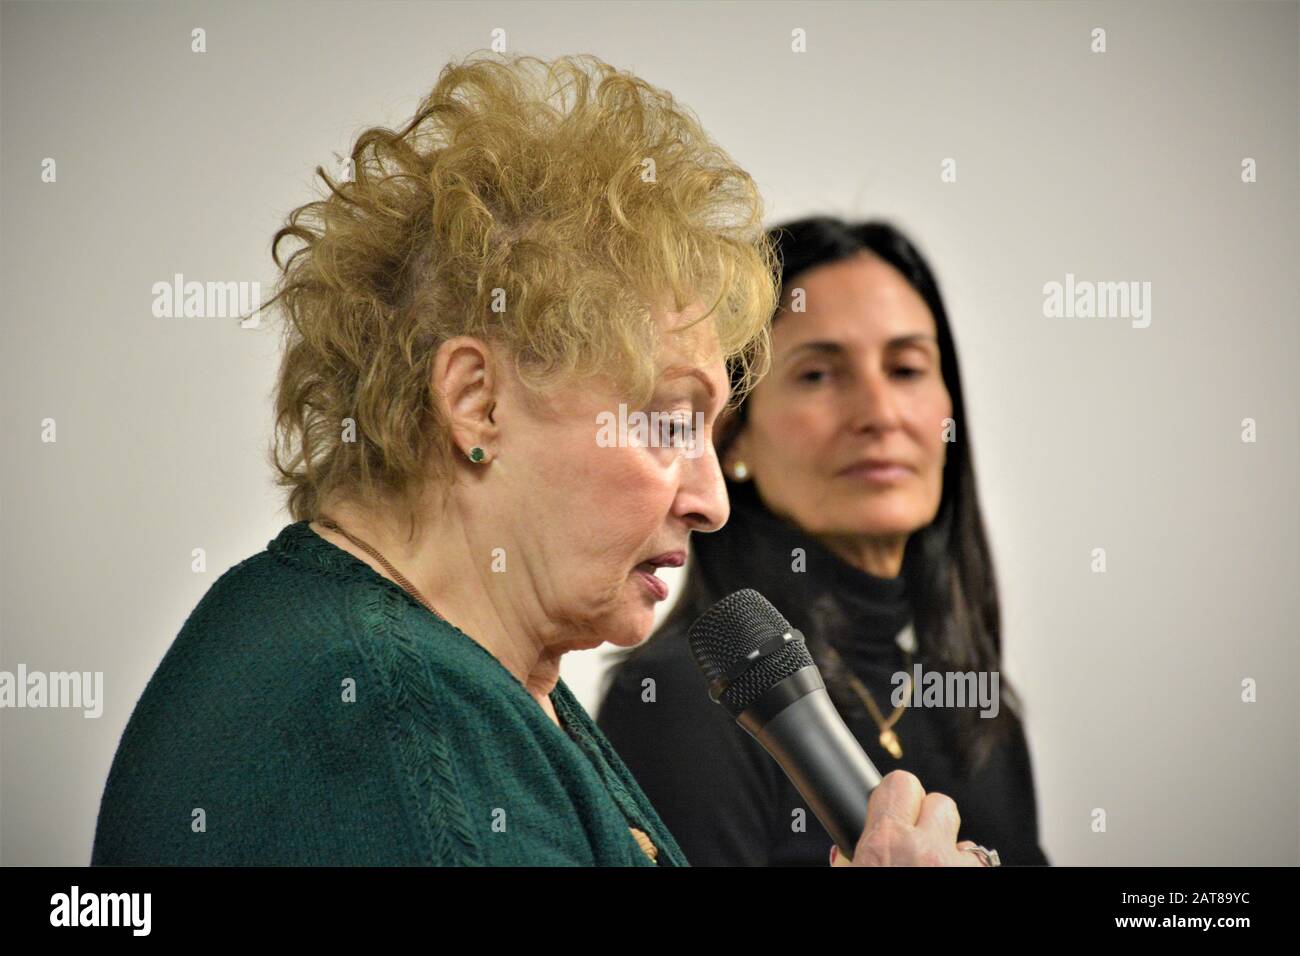 Rita Lurie (1937-) Author, Holocaust survivor from Poland, Los Angeles and Leslie Gilbert-Lurie; NBC exe. Leader, philanthropist - background Stock Photo